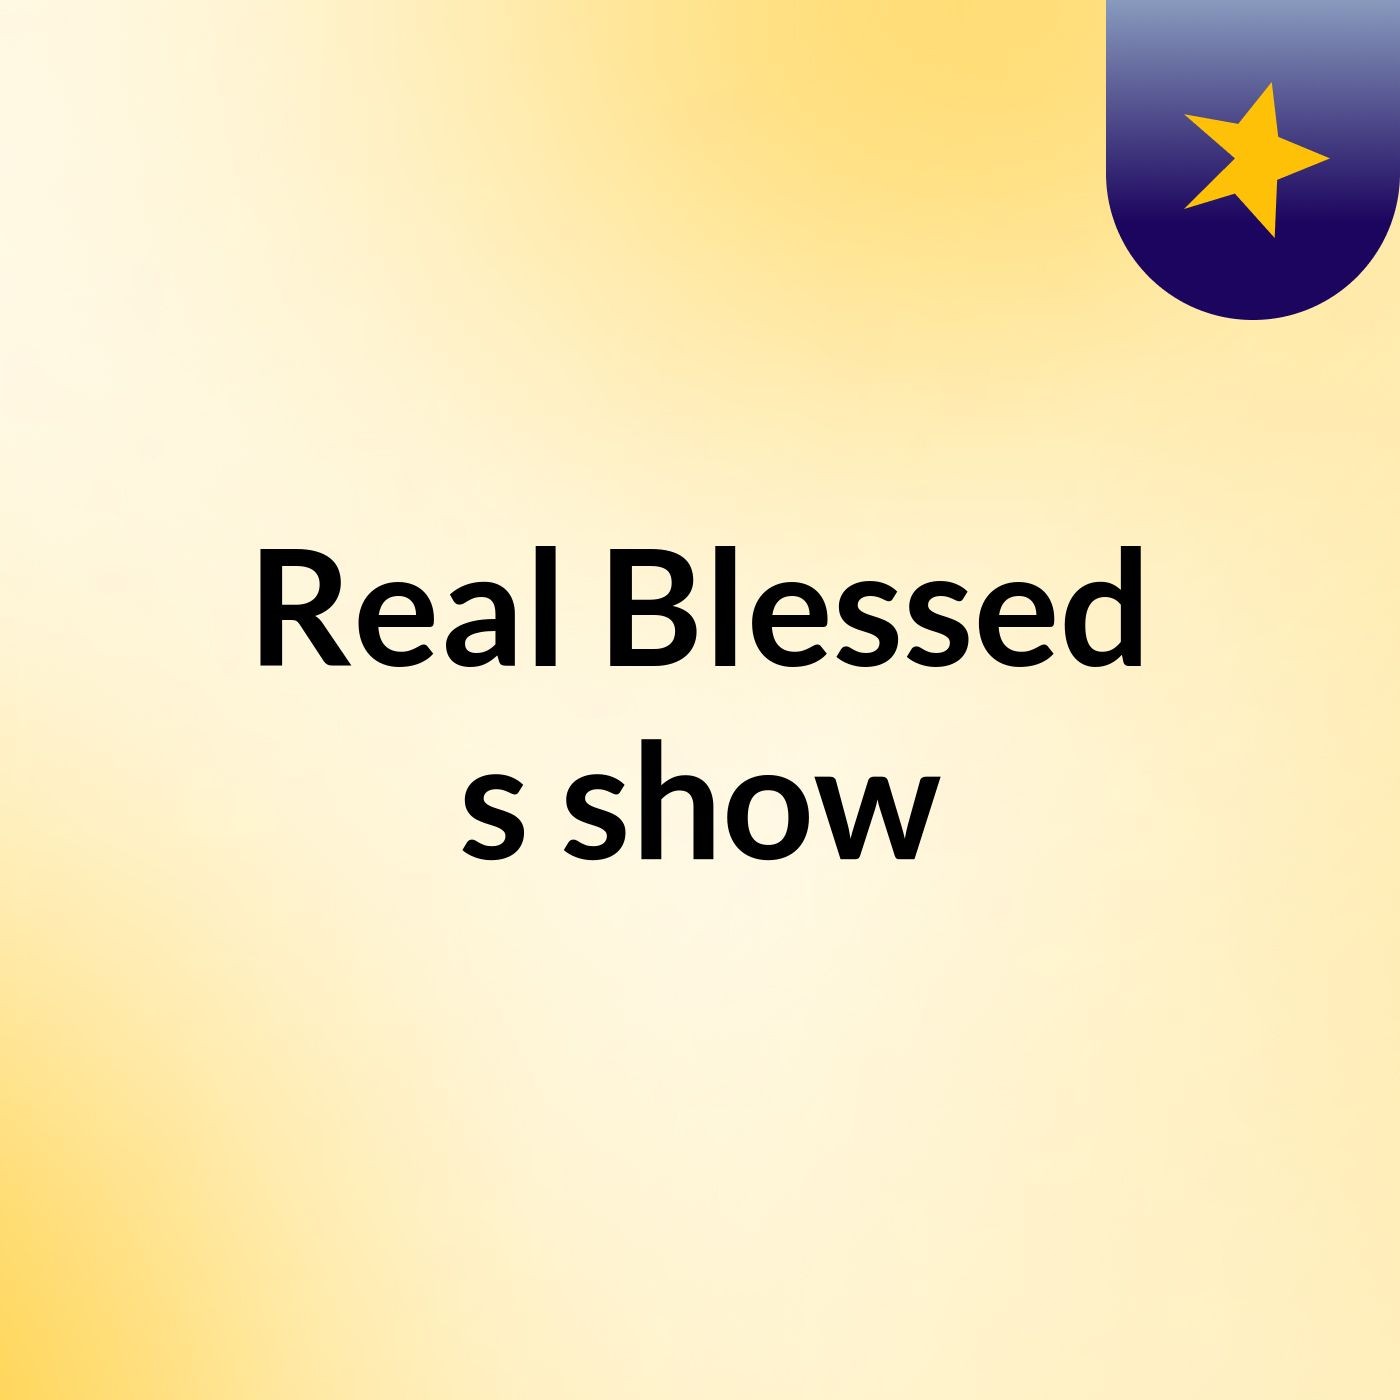 Real Blessed's show